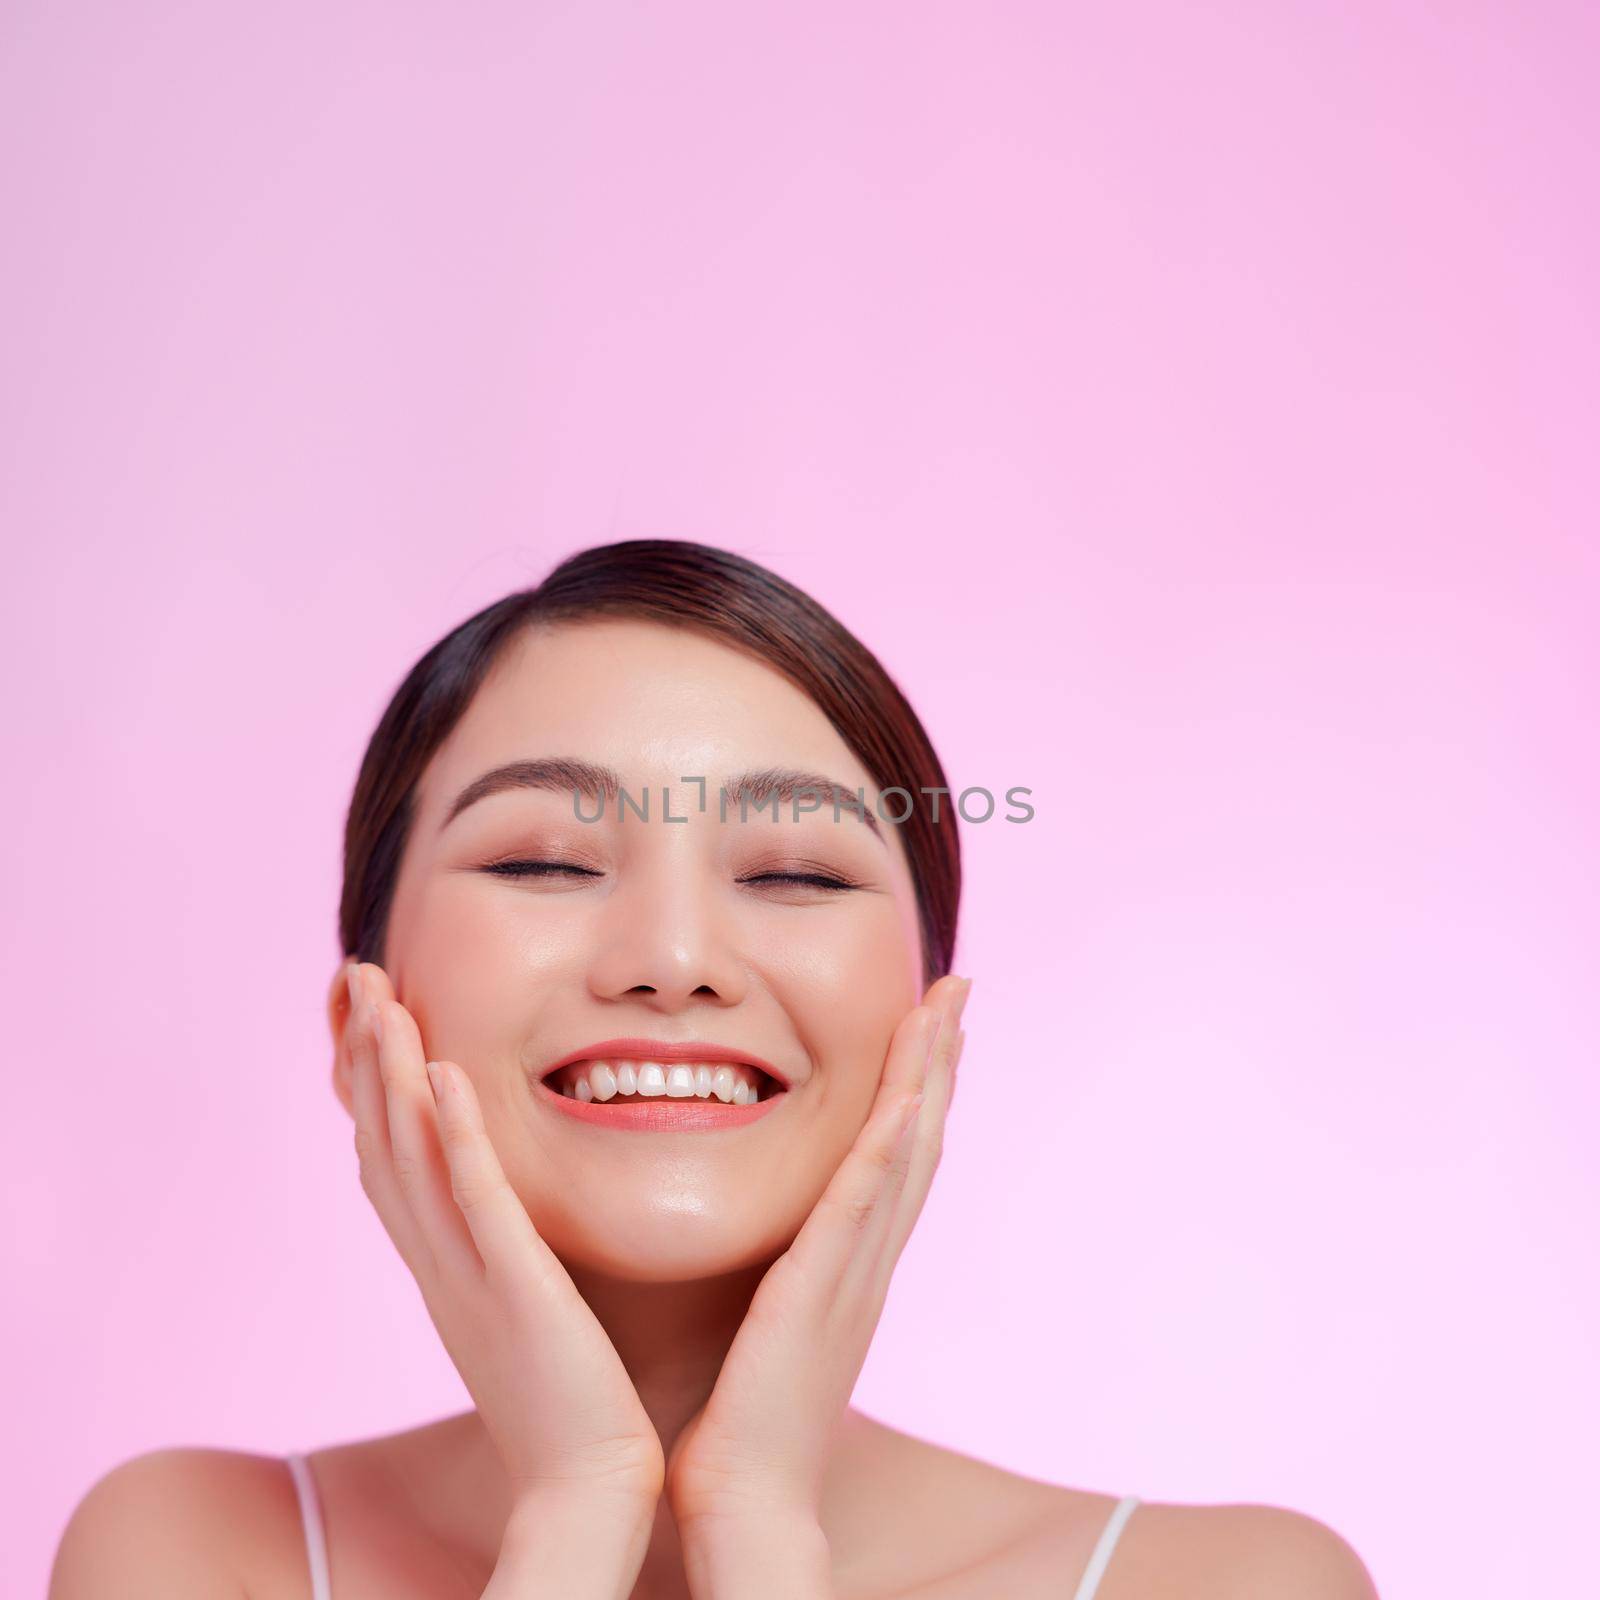 Beauty woman healthy skin concept natural makeup beautiful model girl face hands touching